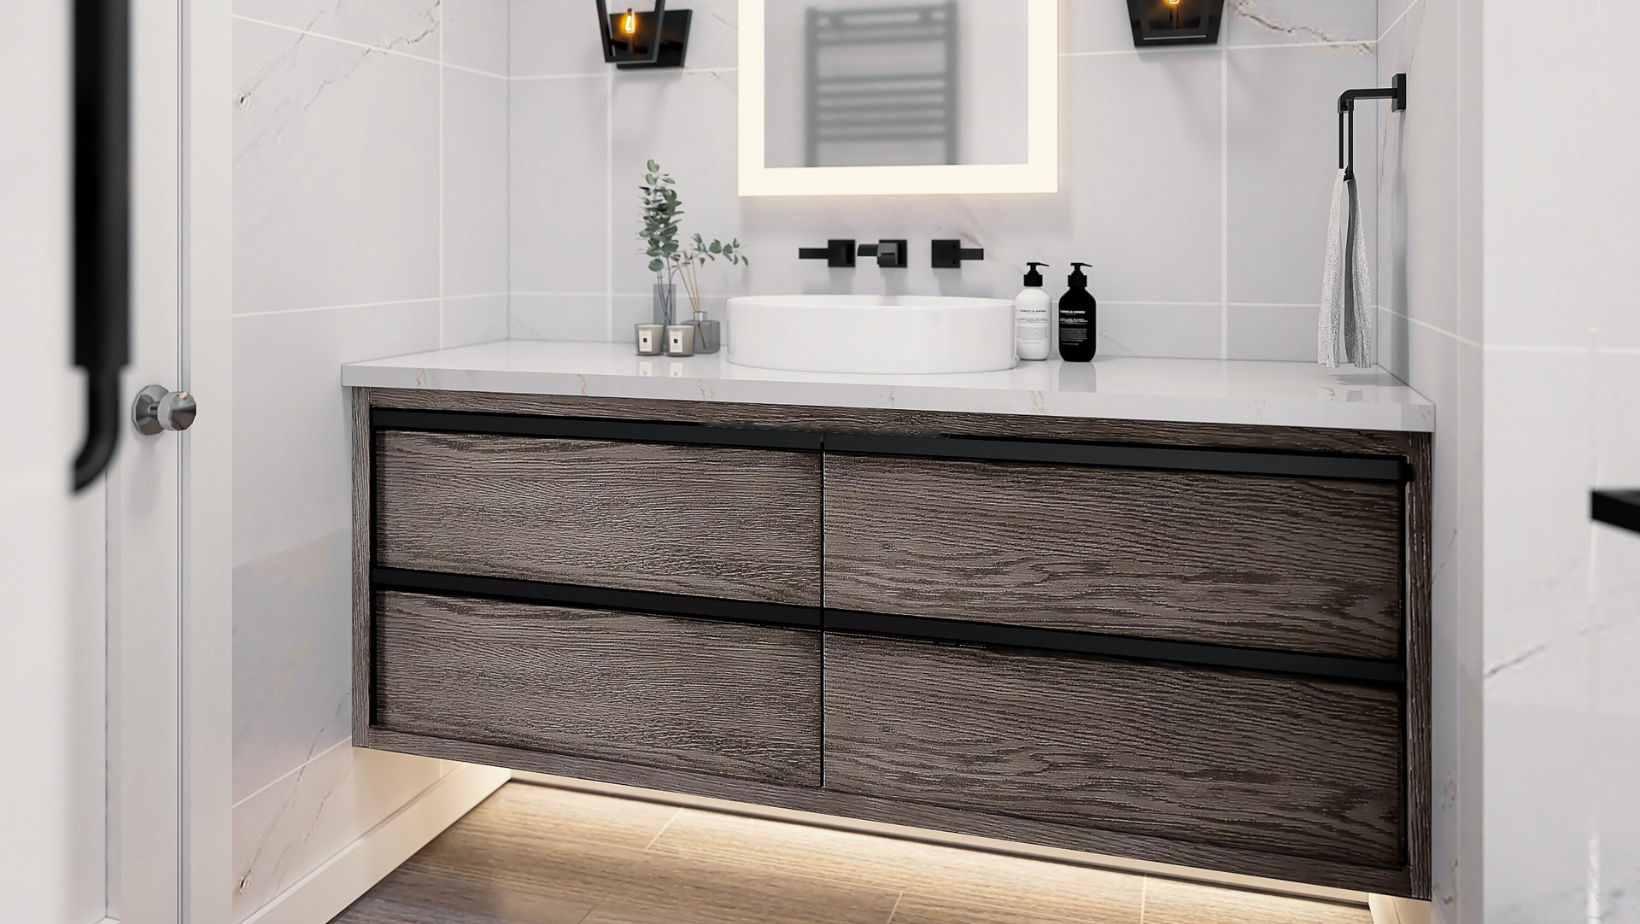 Sage Floating Wall Mounted Vanity - A floating vanity can be a great way to add some extra floorspace to your small bathroom.